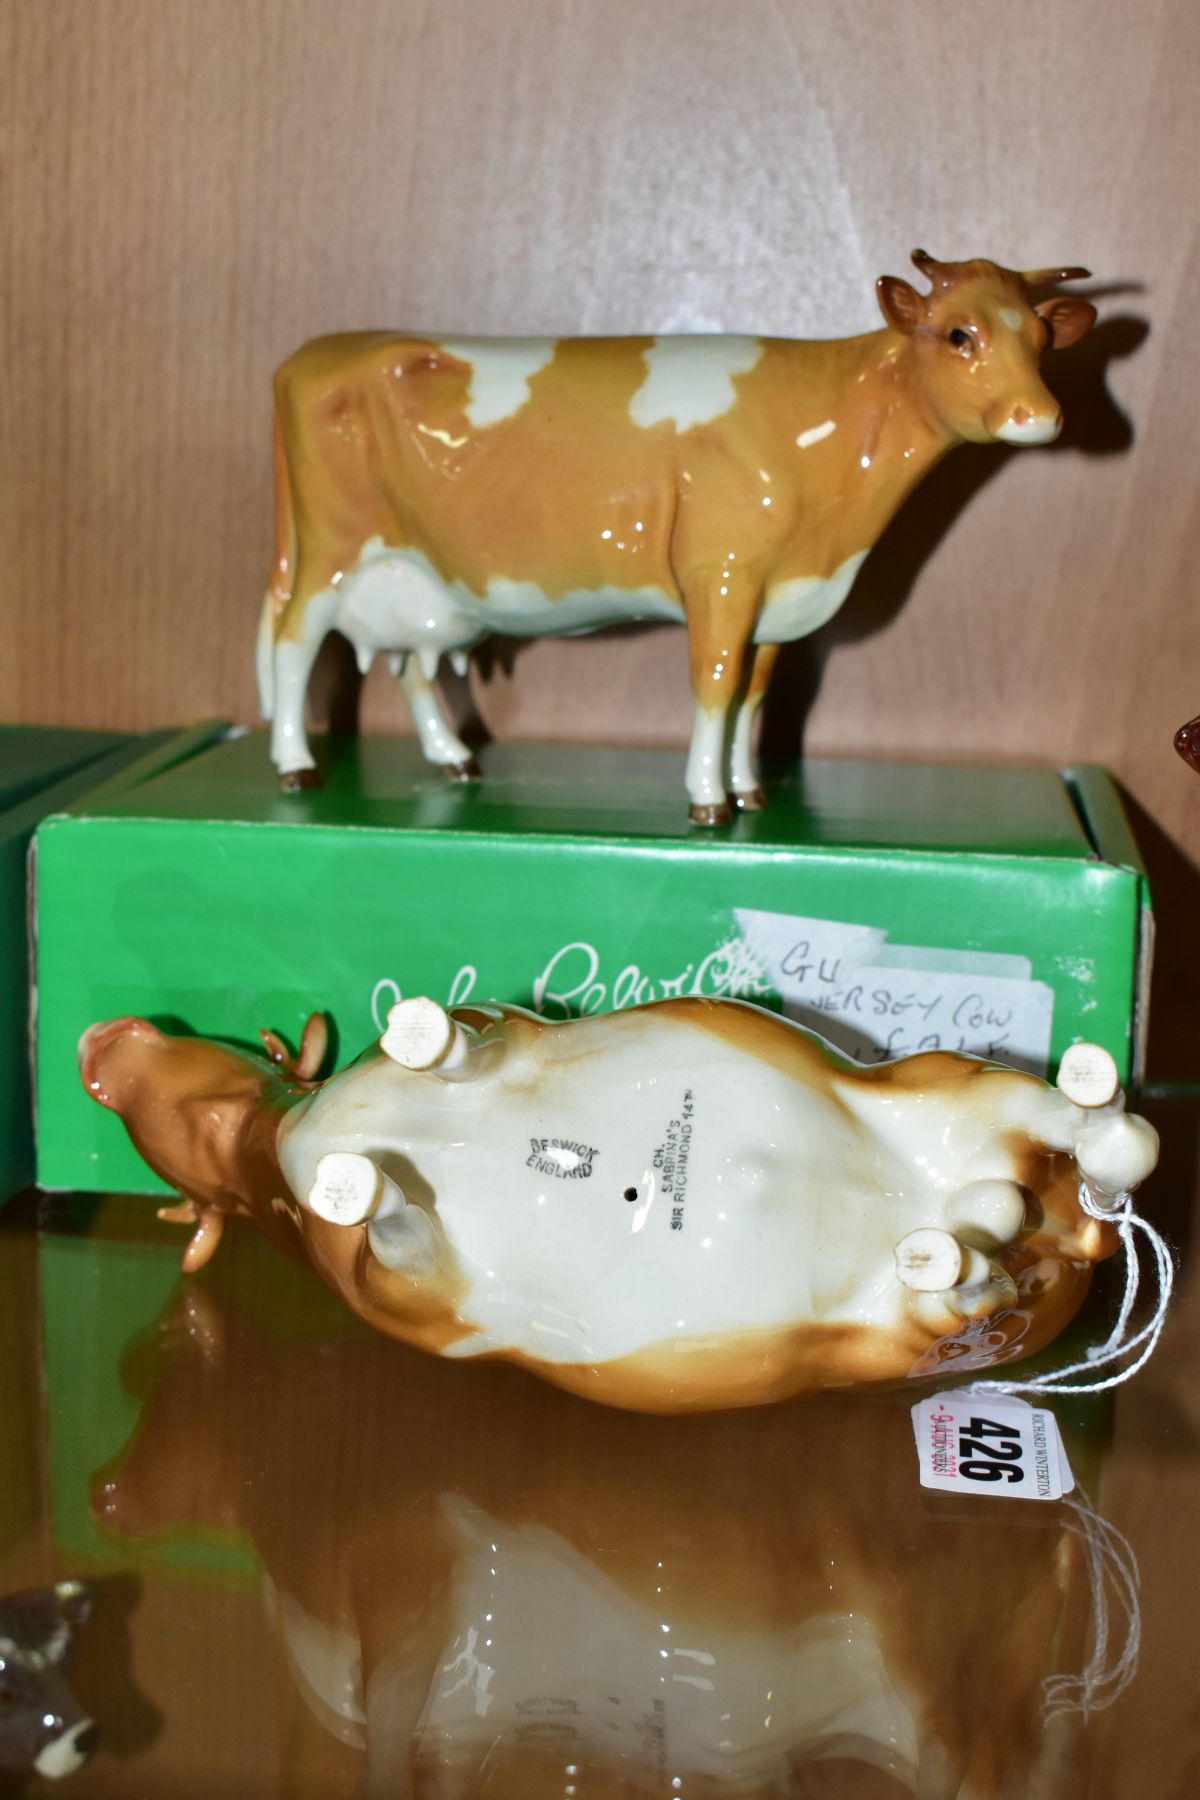 BESWICK GUERNSEY CATTLE, comprising Bull Ch. Sabrina's Sir Richmond 14th, No.1451 two Guernsey Cows, - Image 5 of 6